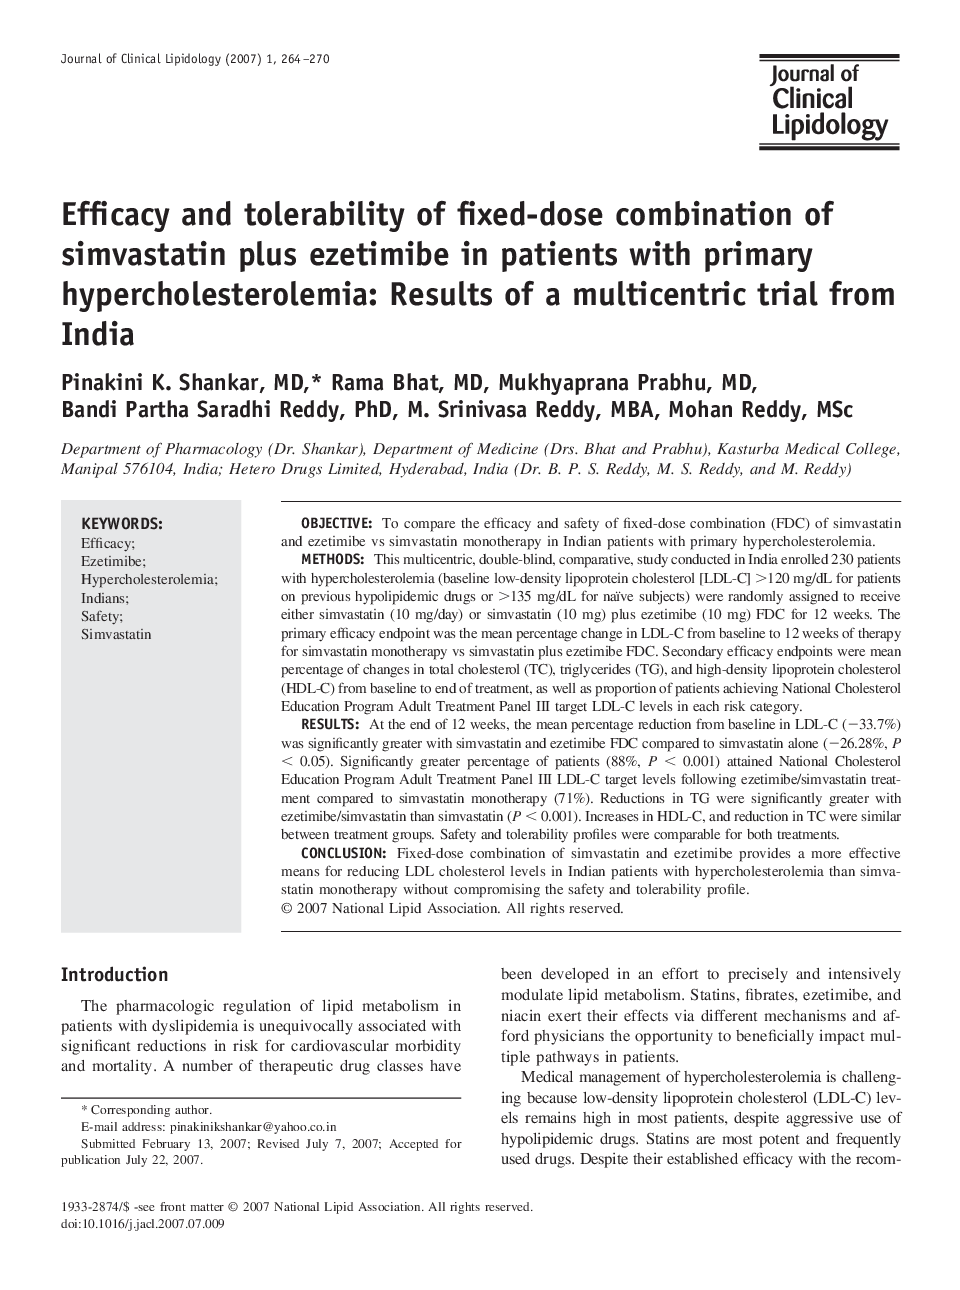 Efficacy and tolerability of fixed-dose combination of simvastatin plus ezetimibe in patients with primary hypercholesterolemia: Results of a multicentric trial from India